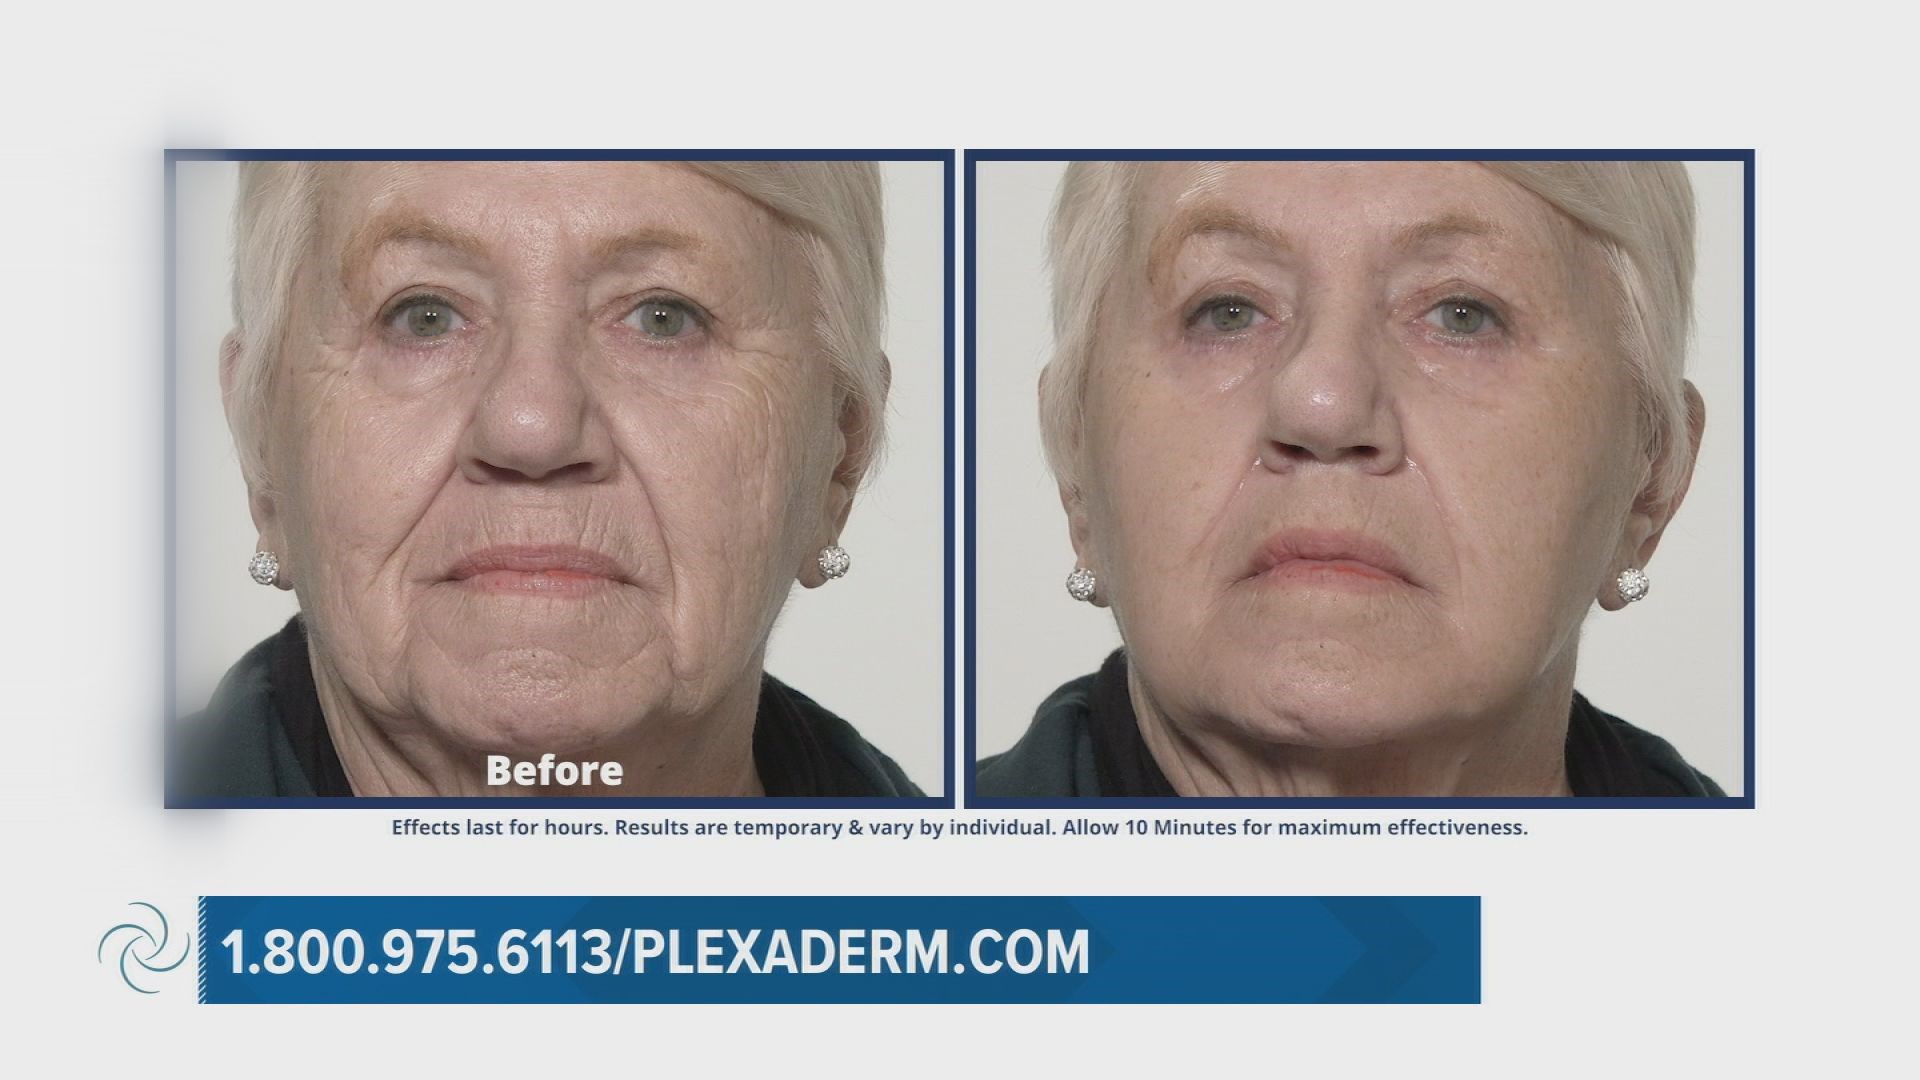 Plexaderm can help you look years younger